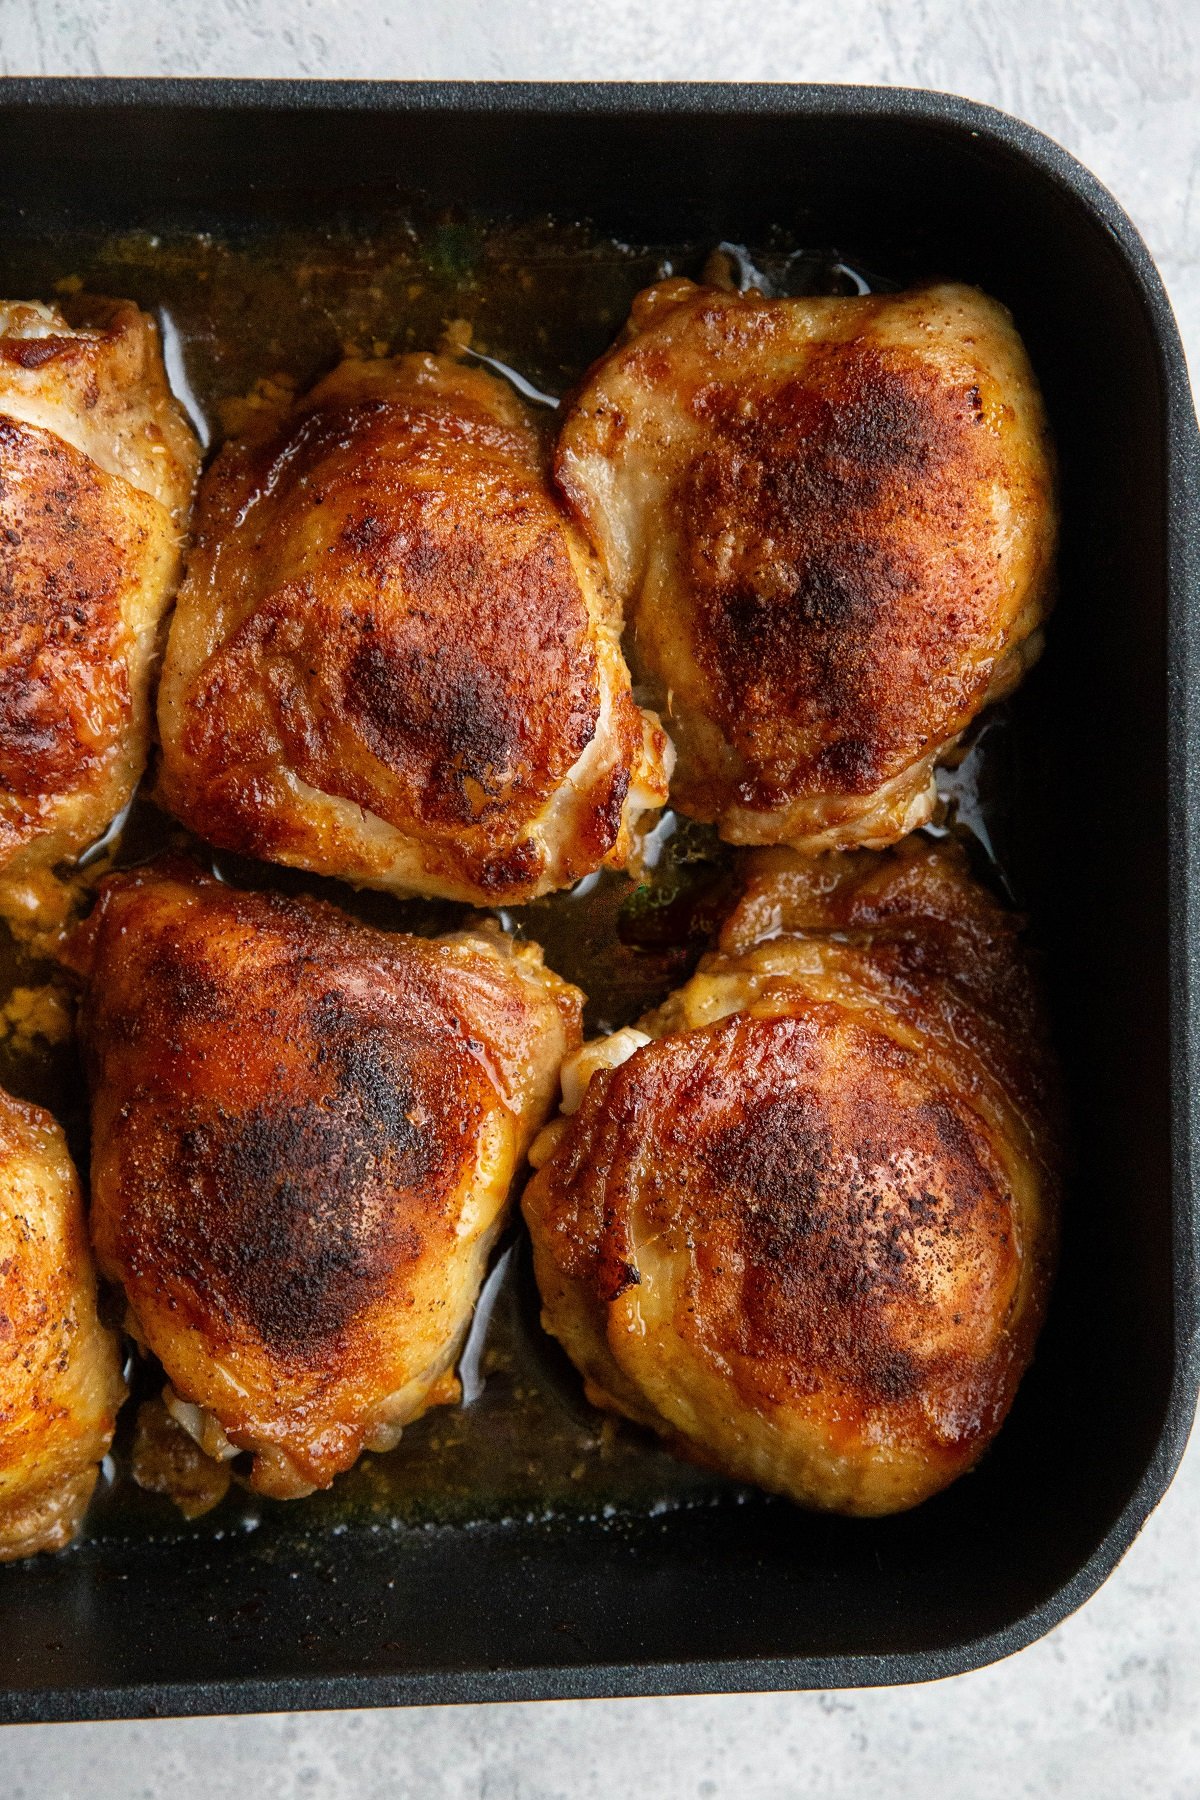 Baking dish with baked chicken inside, ready to eat.